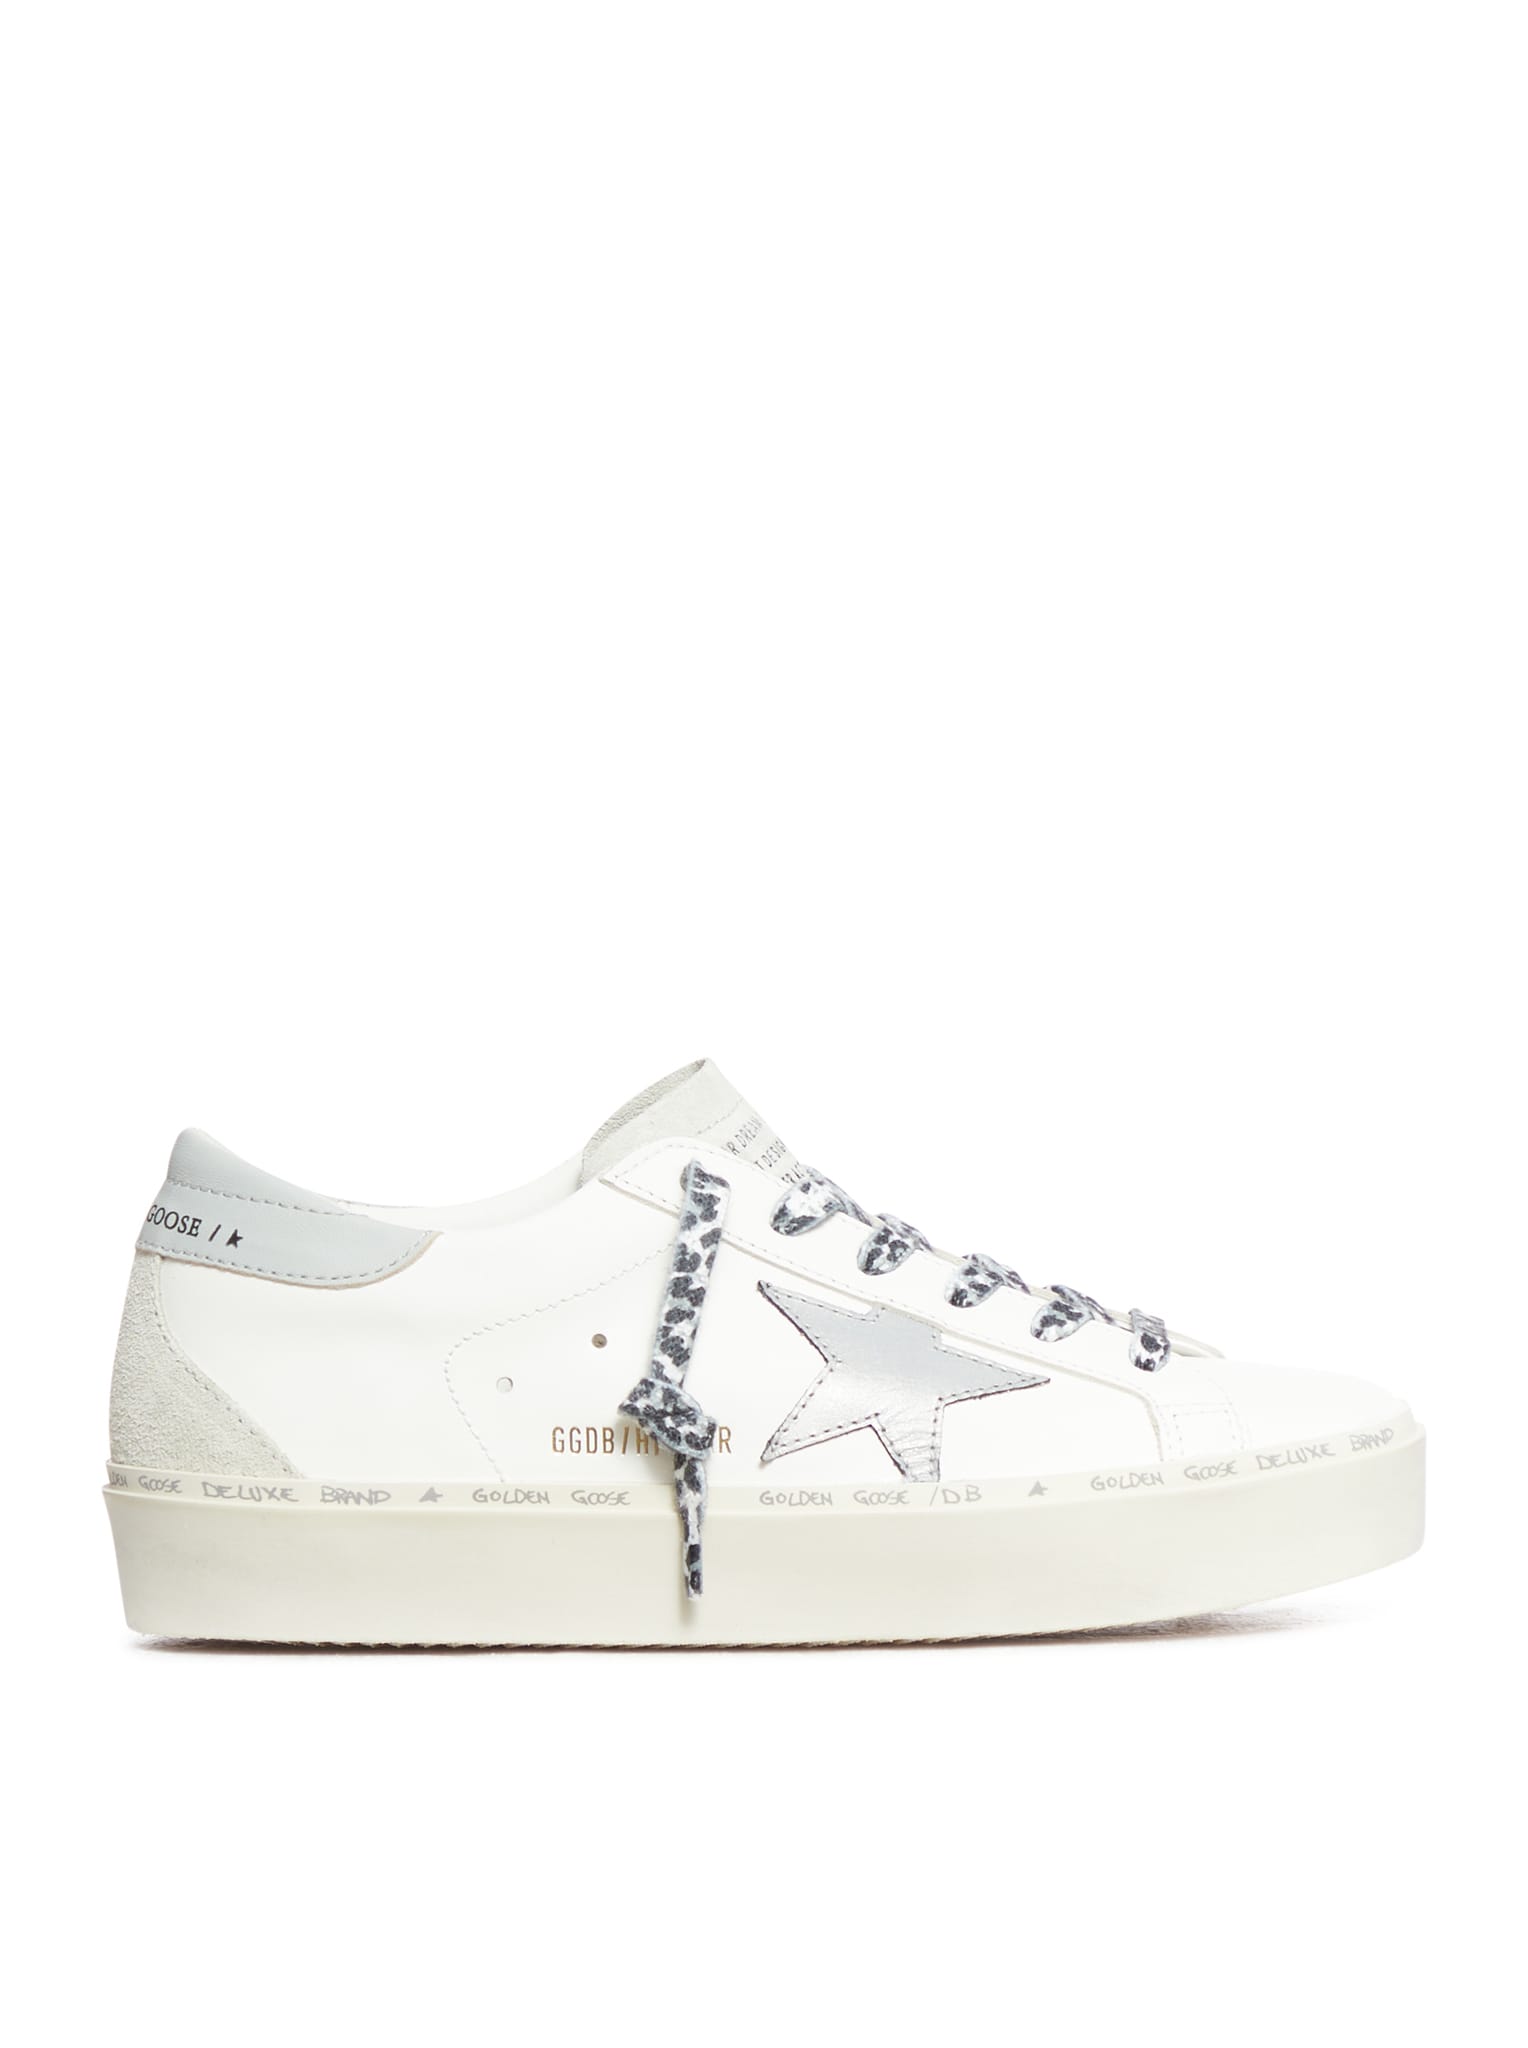 Golden Goose Hi Star Leather Upper And Star Nappa Heel Suede Spur In Optic White Aqua Grey